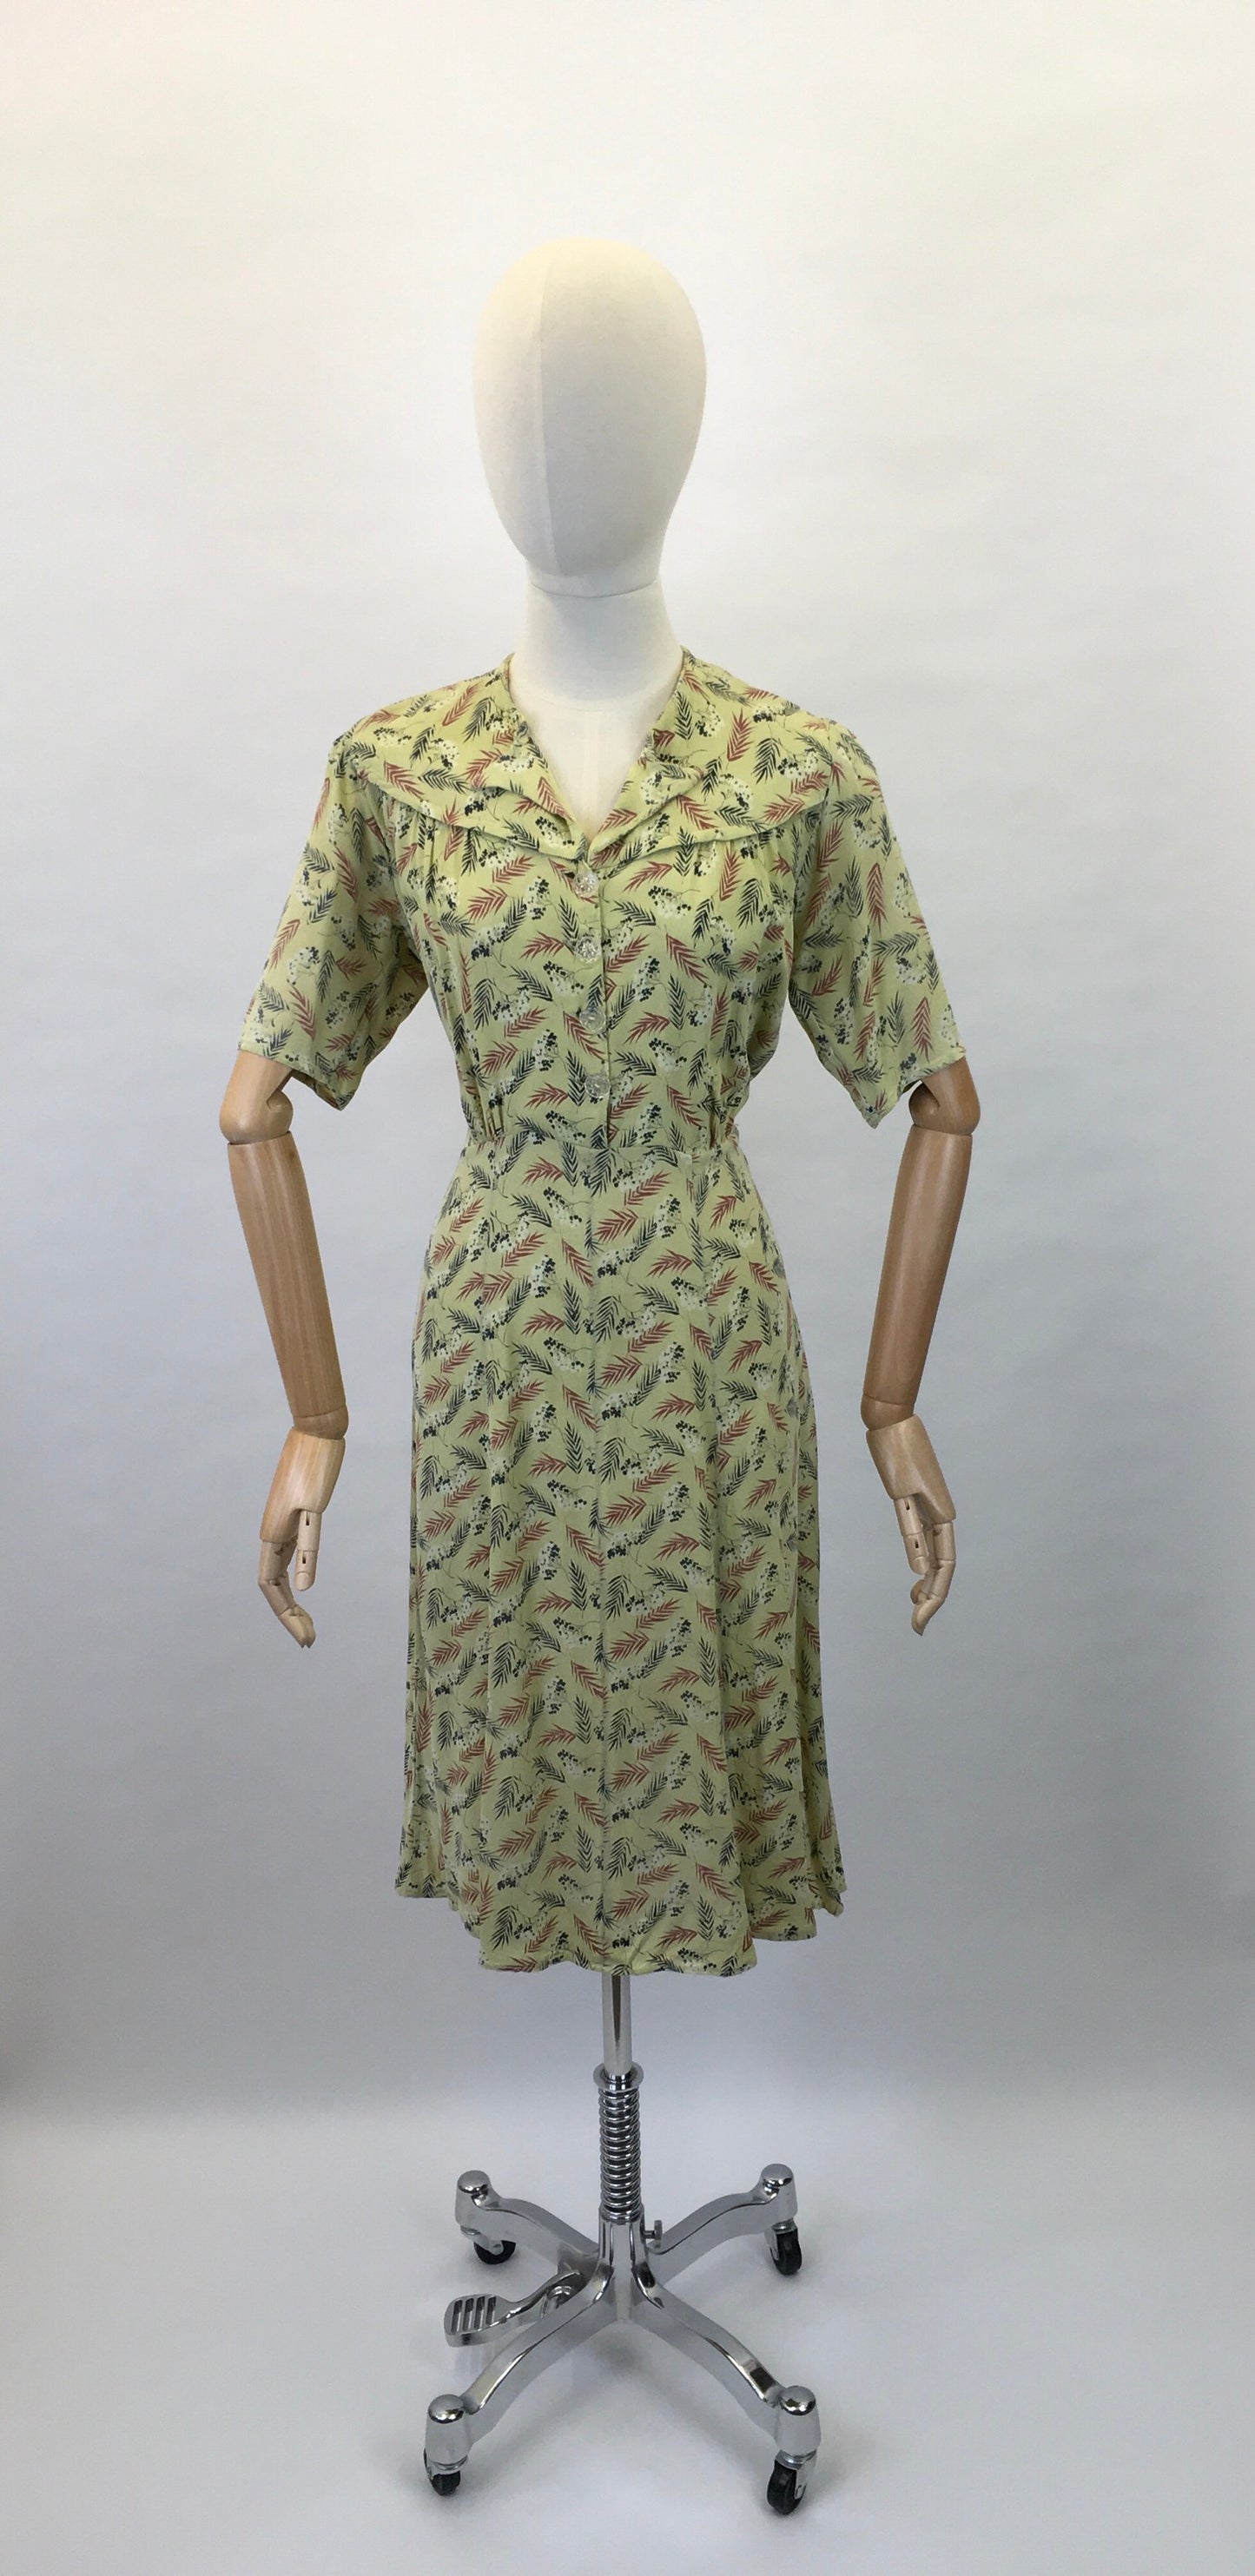 Original 1940s Day Dress - In a Lovely Chartreuse Crepe with Wheat / Leaf Print In Charcoal, Rust and White